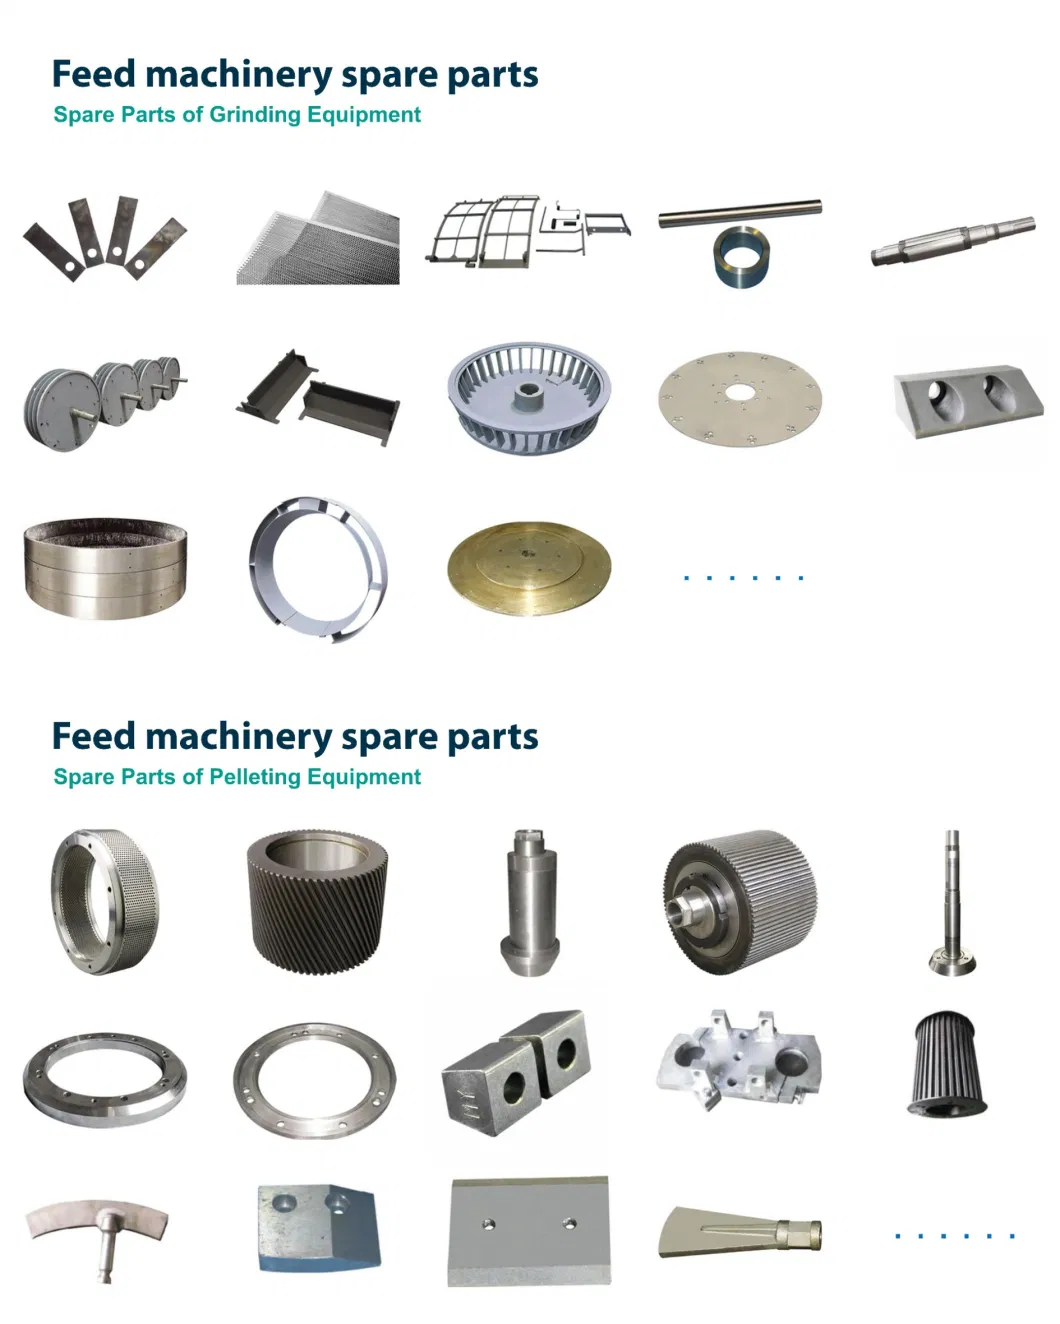 Zhengchang Szlh420d Pellet Machine Stainless Steel X46cr13 (4Cr13) Ring Die in Feed Processing Machinery Spare Parts